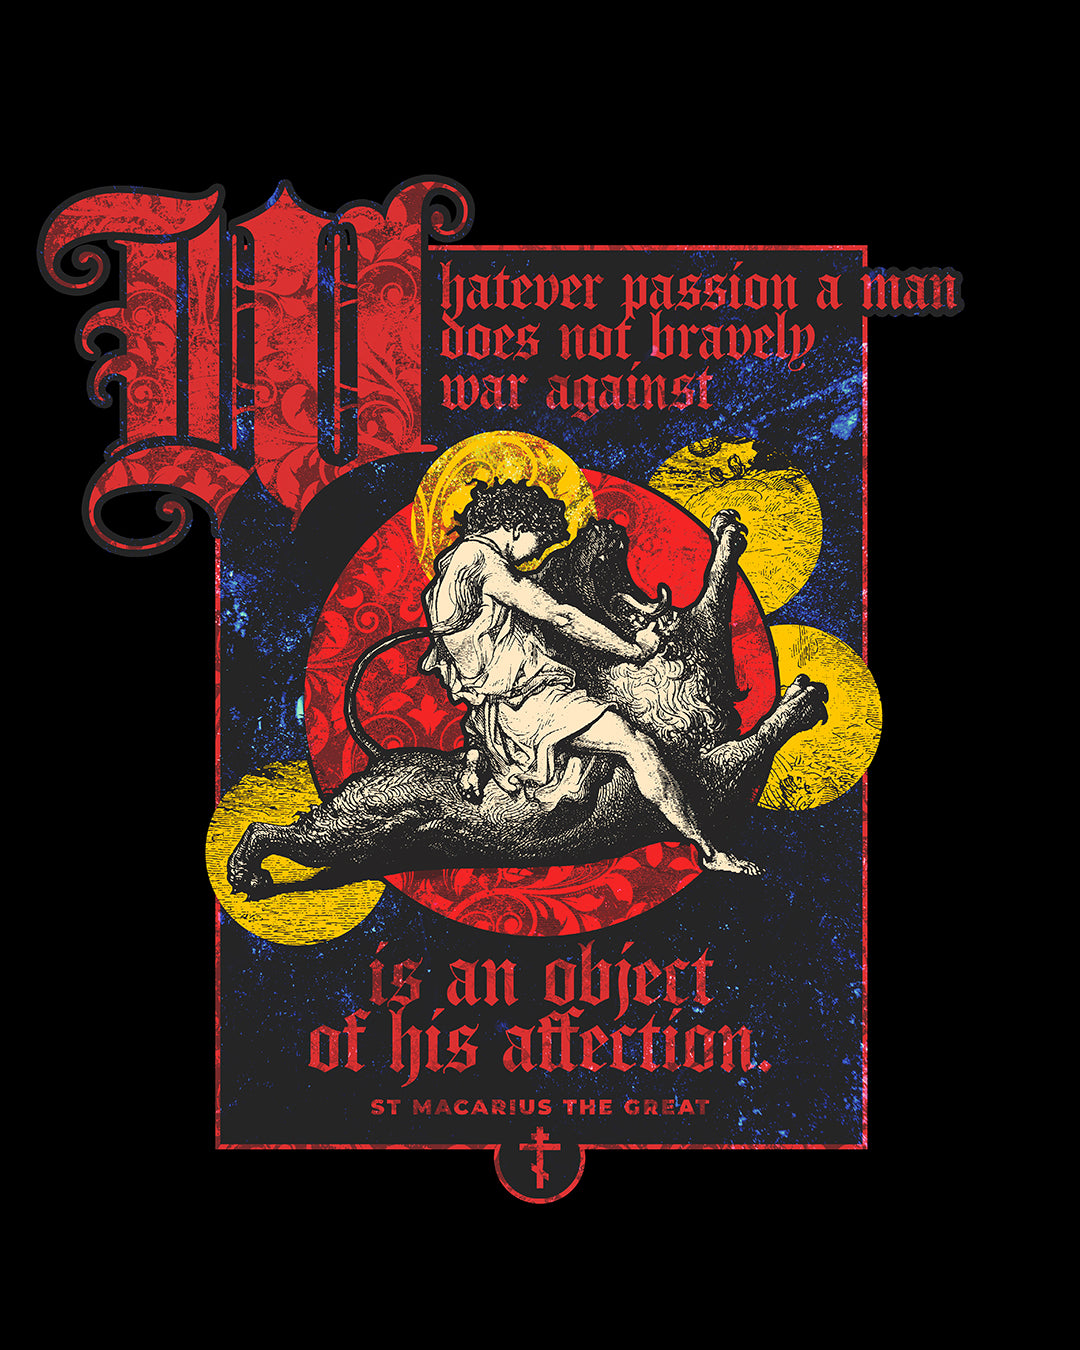 Whatever Passion a Man Does Not Bravely War Against (St Macarius the Great) No. 1 | Orthodox Christian T-Shirt